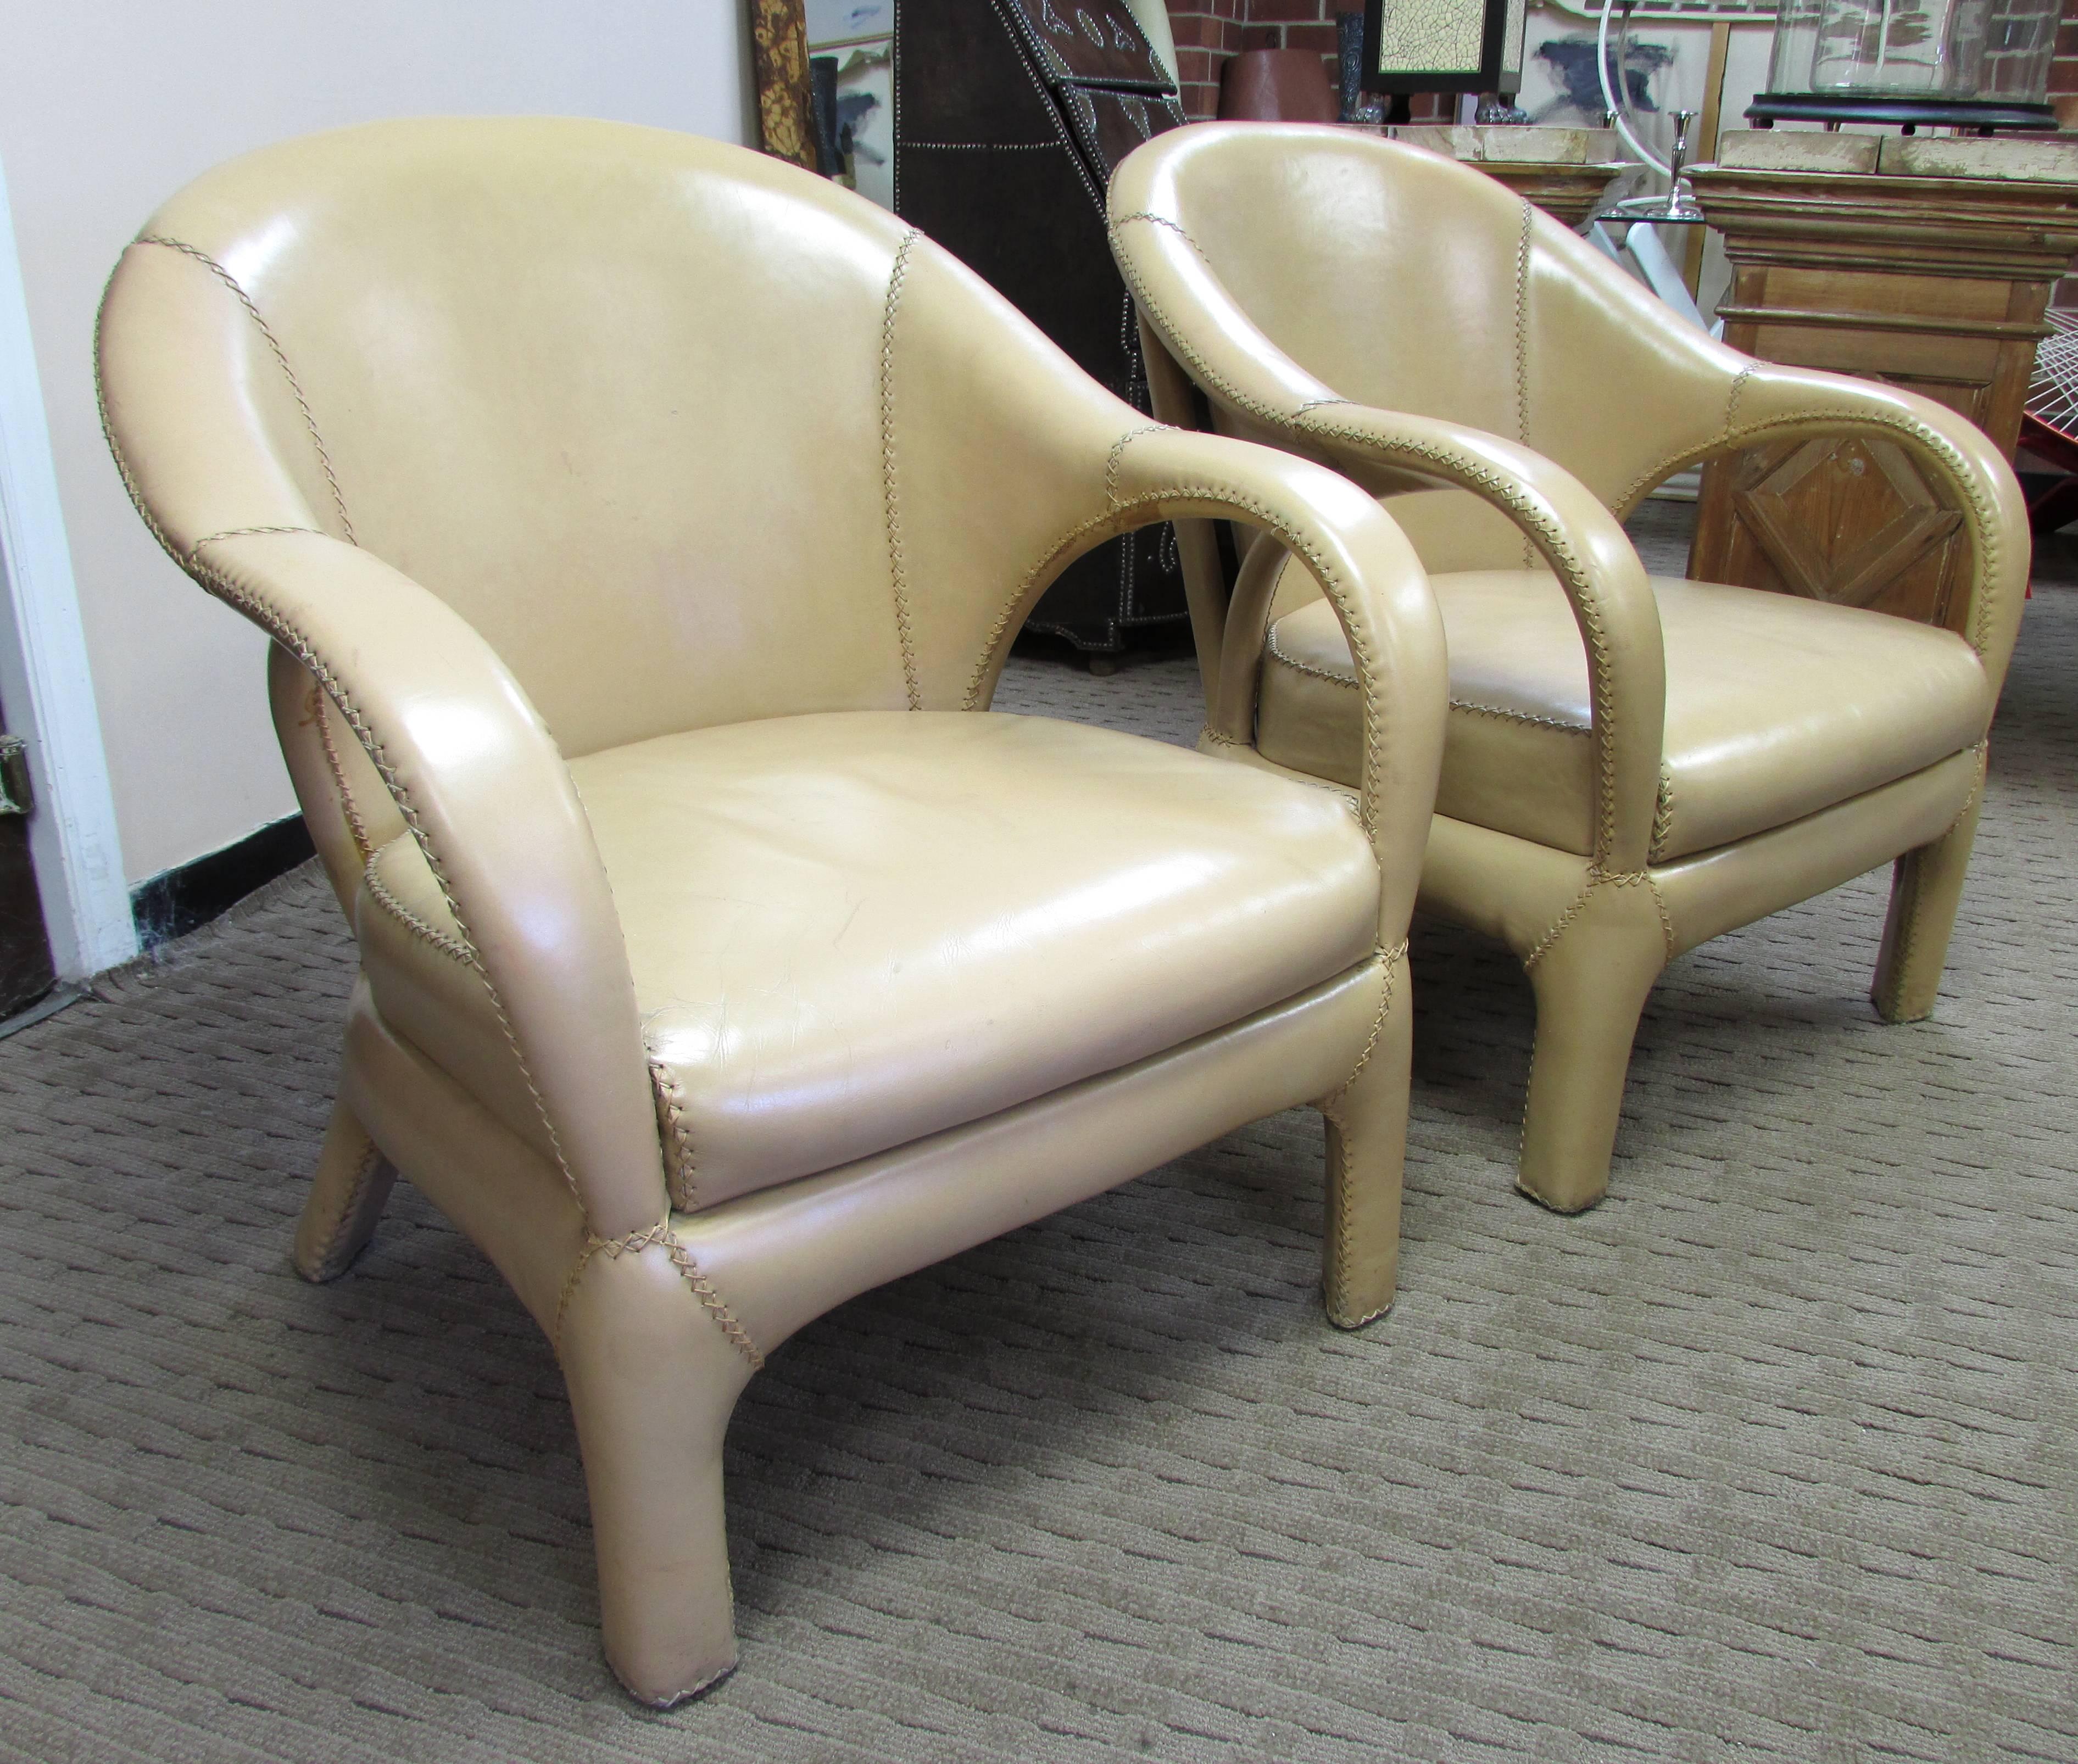 Pair of tan leather tub chairs with hand stitching throughout including frame